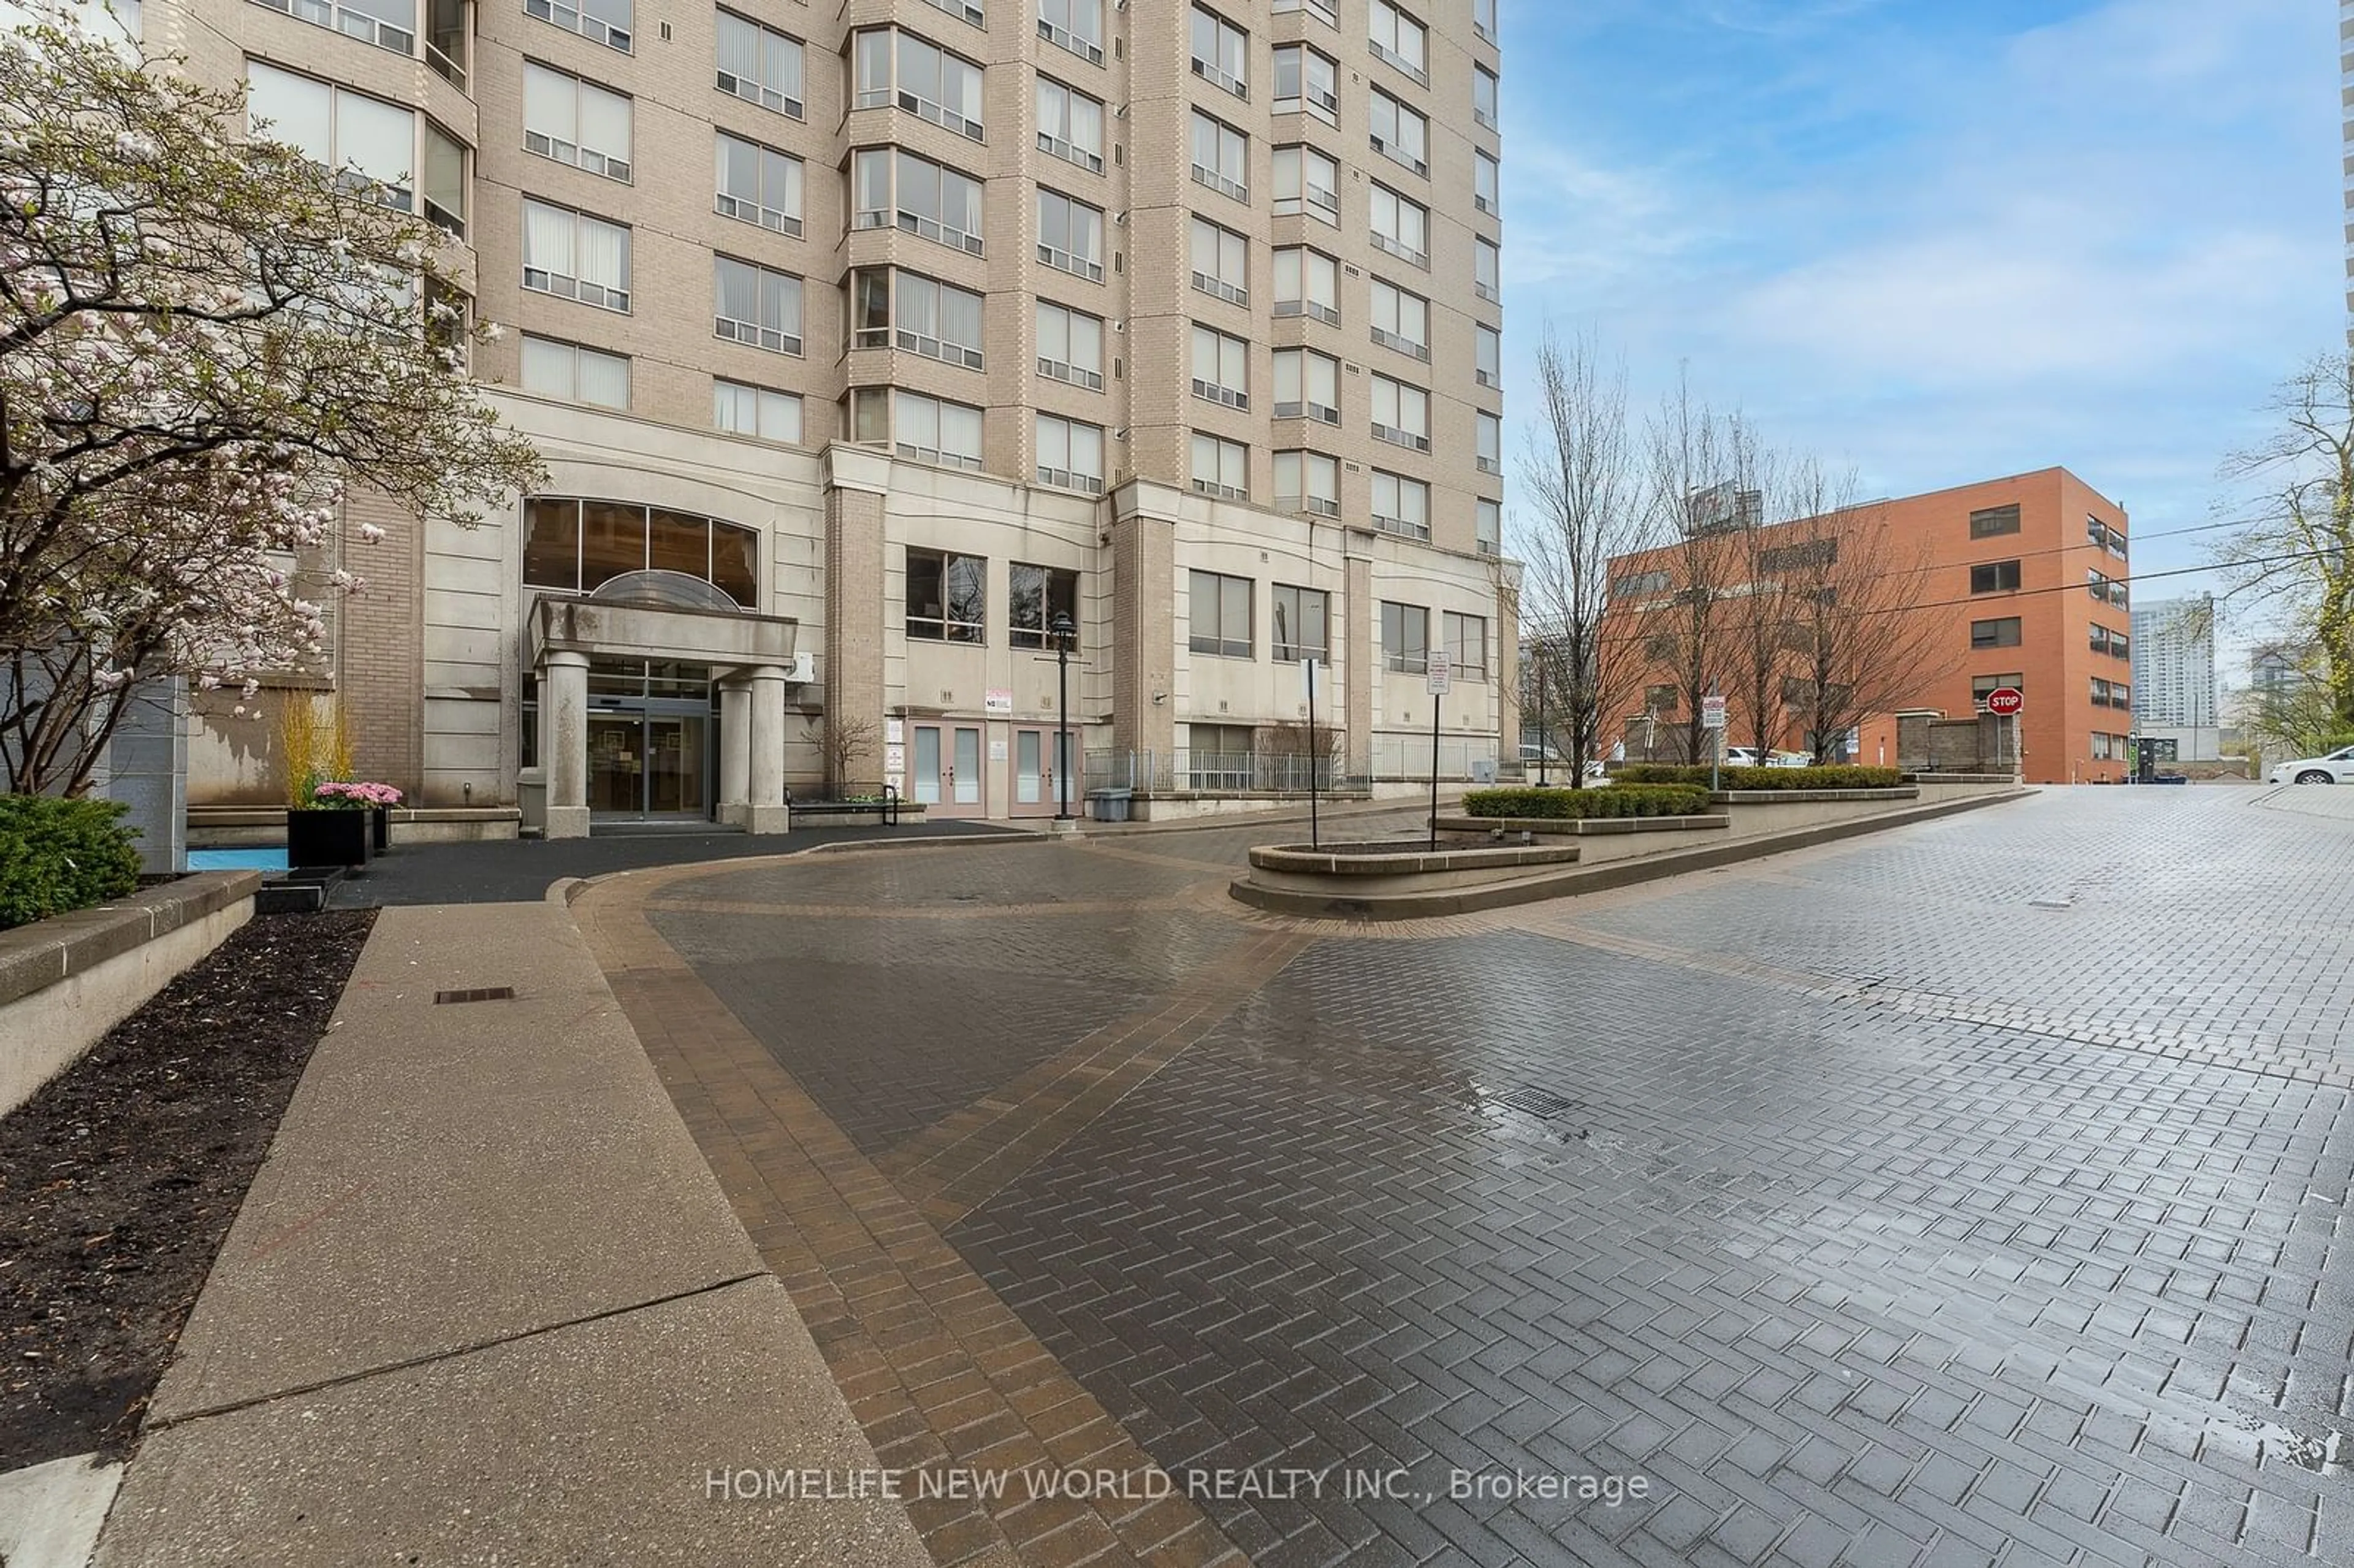 A pic from exterior of the house or condo for 5418 Yonge St #1110, Toronto Ontario M2N 6X4